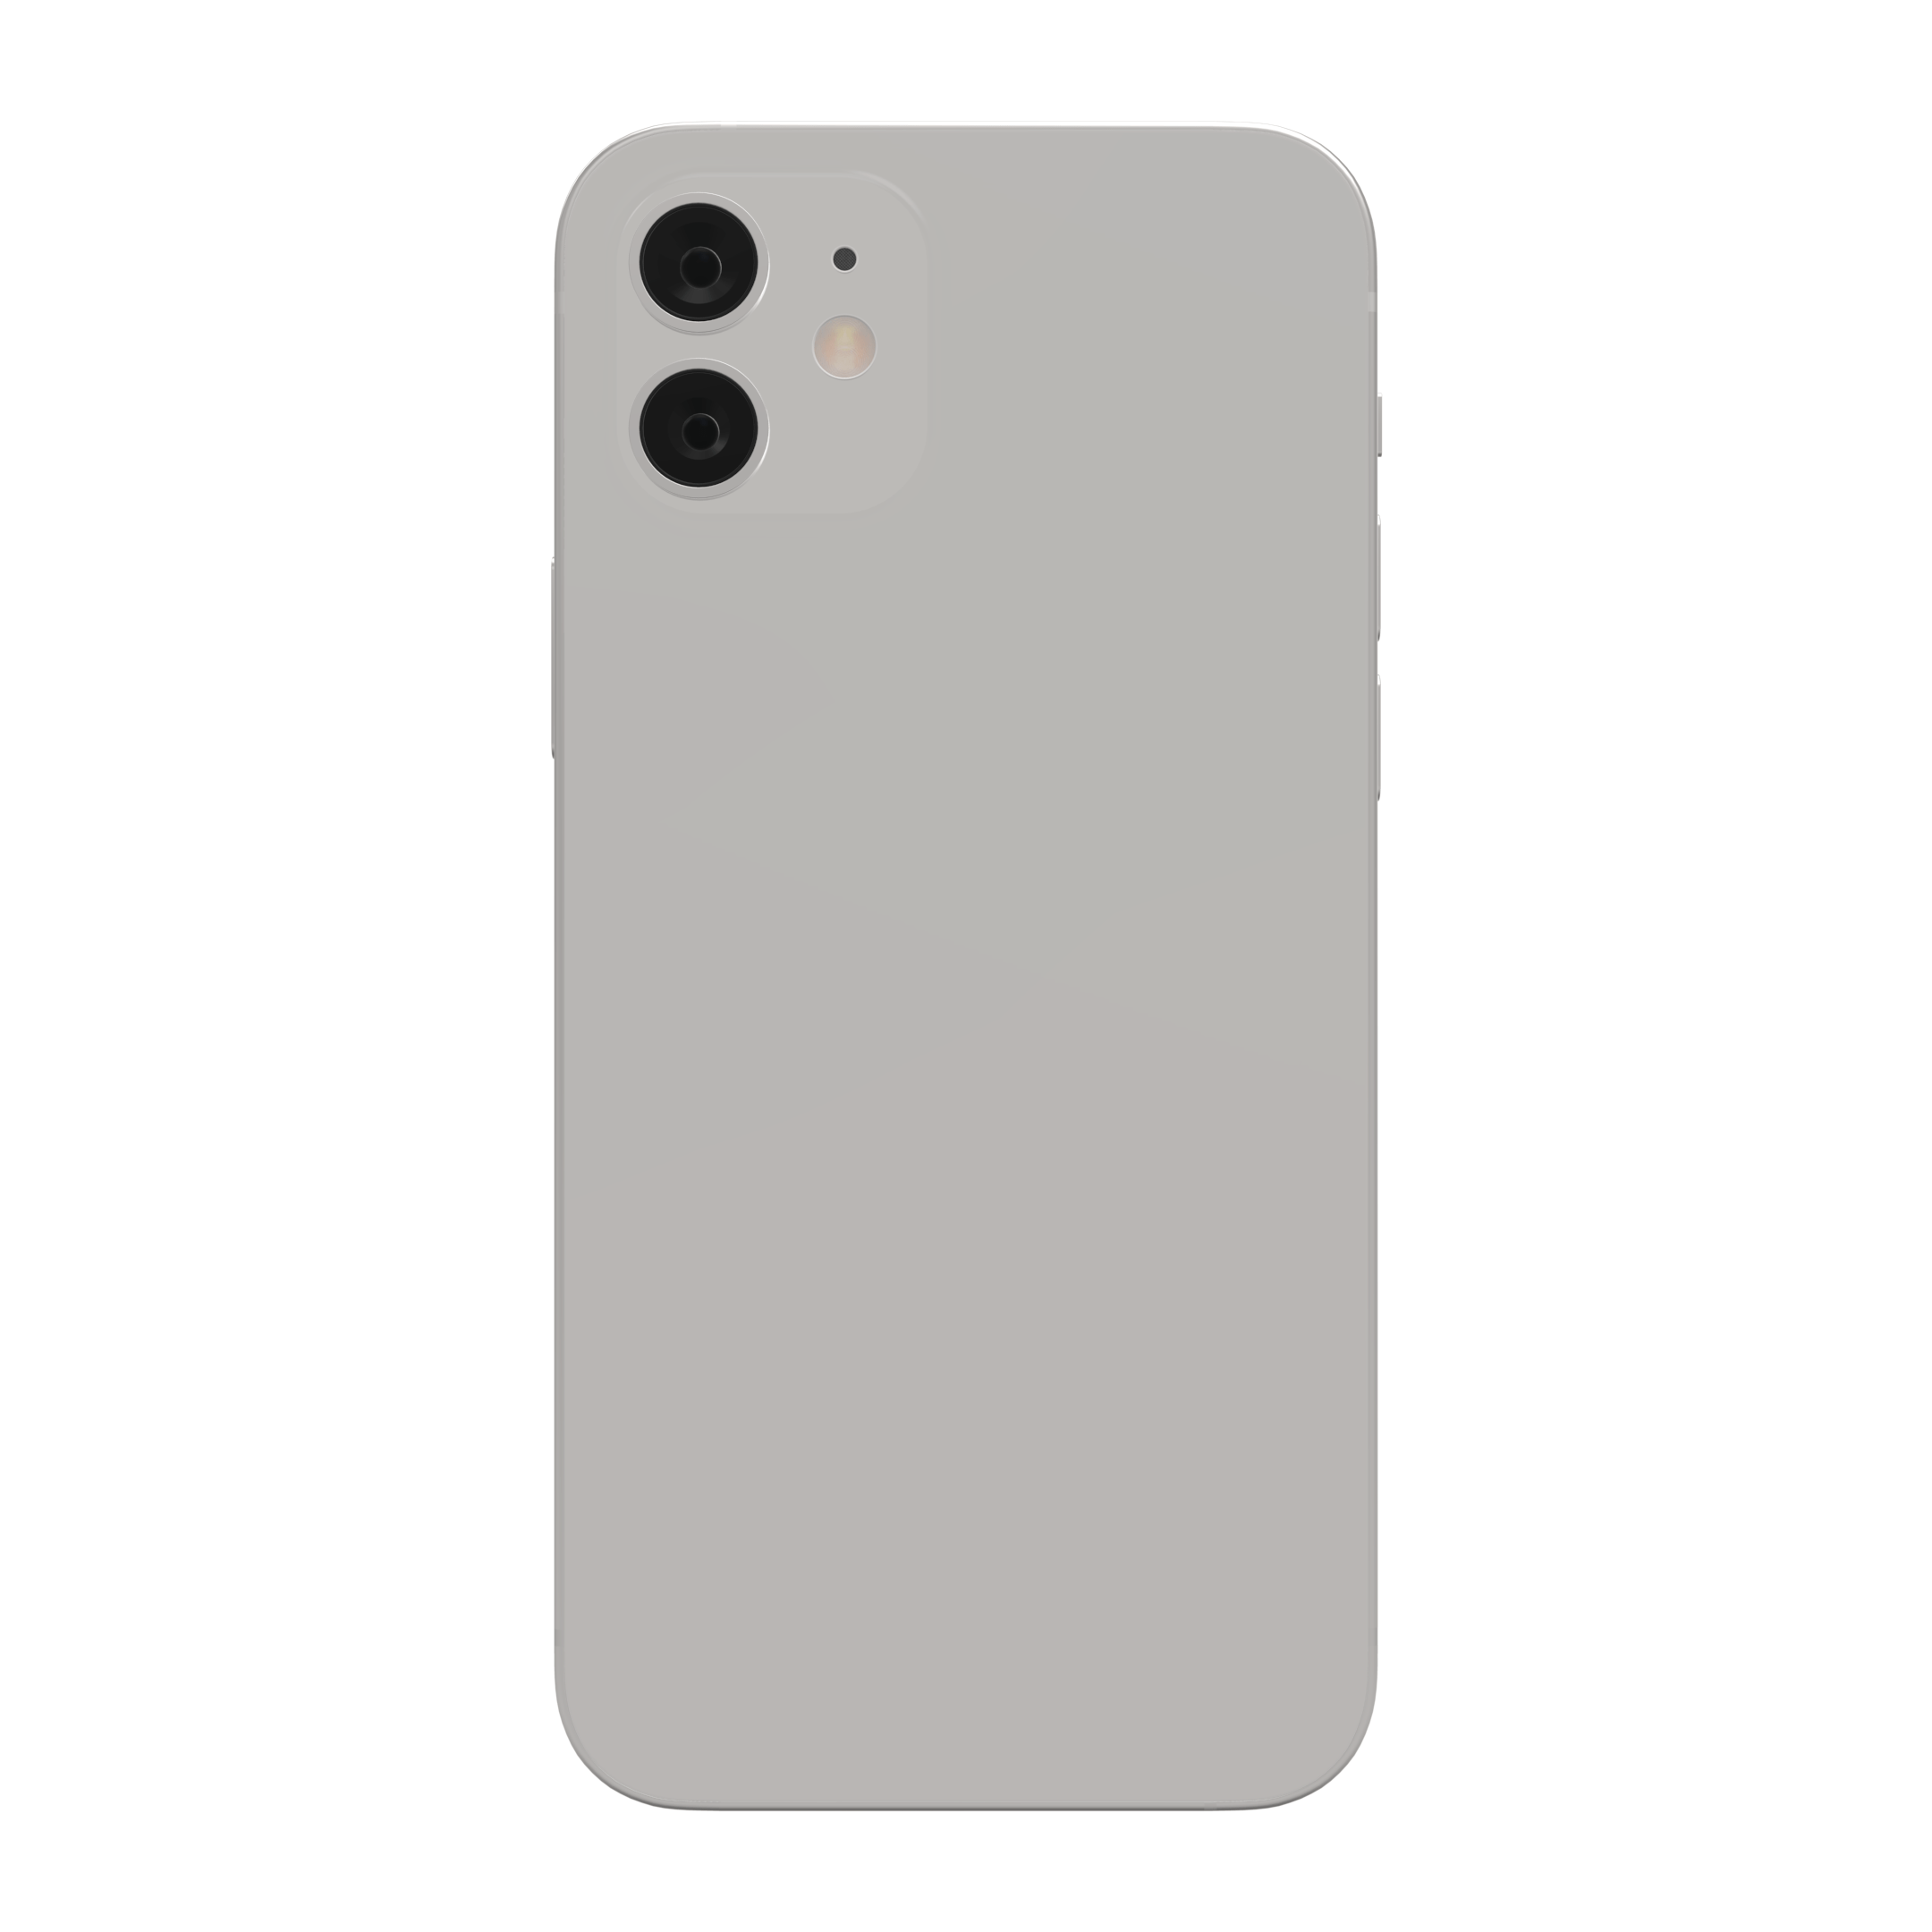 Back side of template using a gray iPhone 12